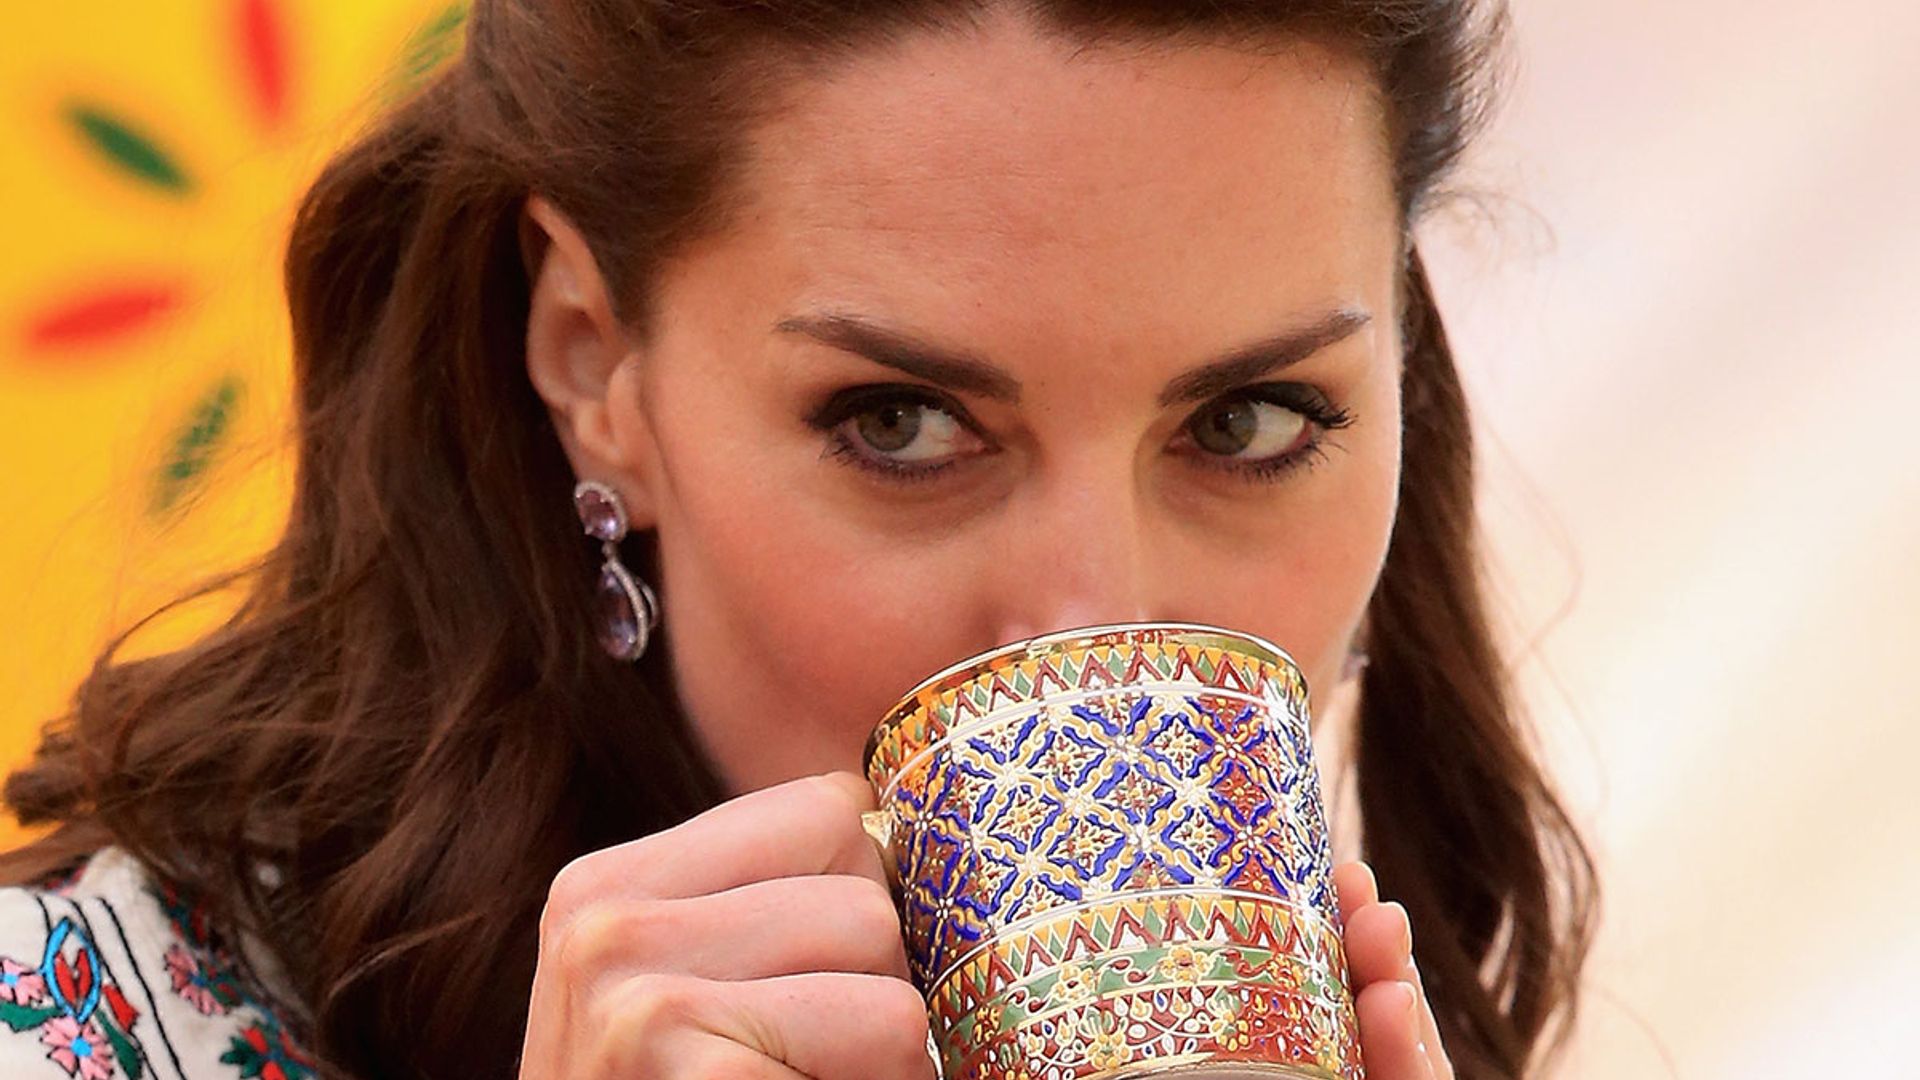 Kate Middleton's afternoon tea ritual revealed – and it's so normal